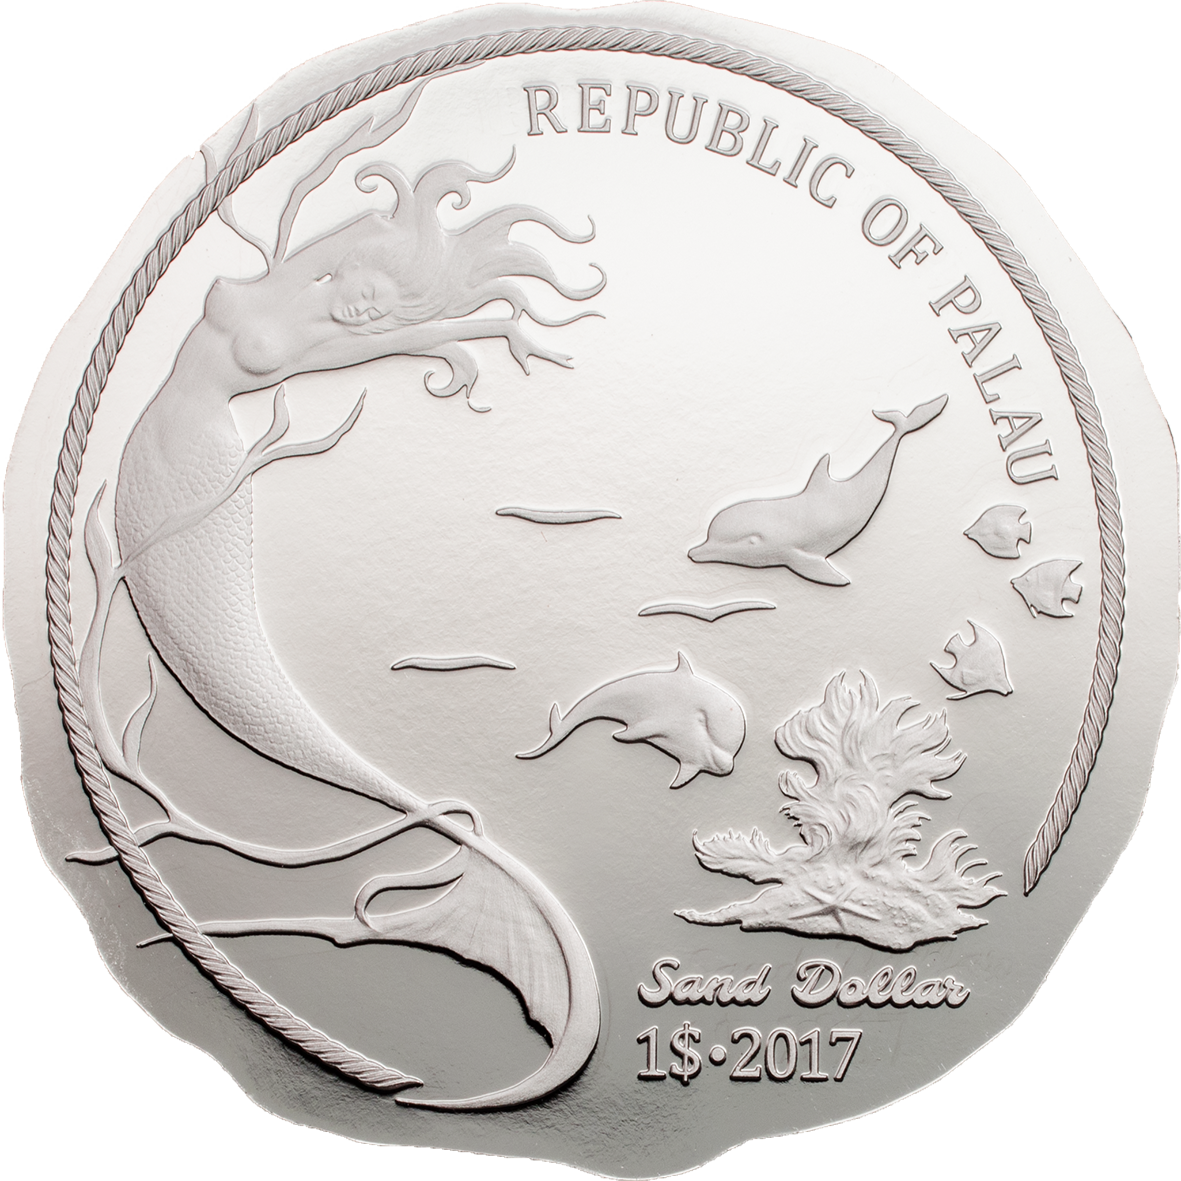 A Silver Coin With A Mermaid And Dolphins